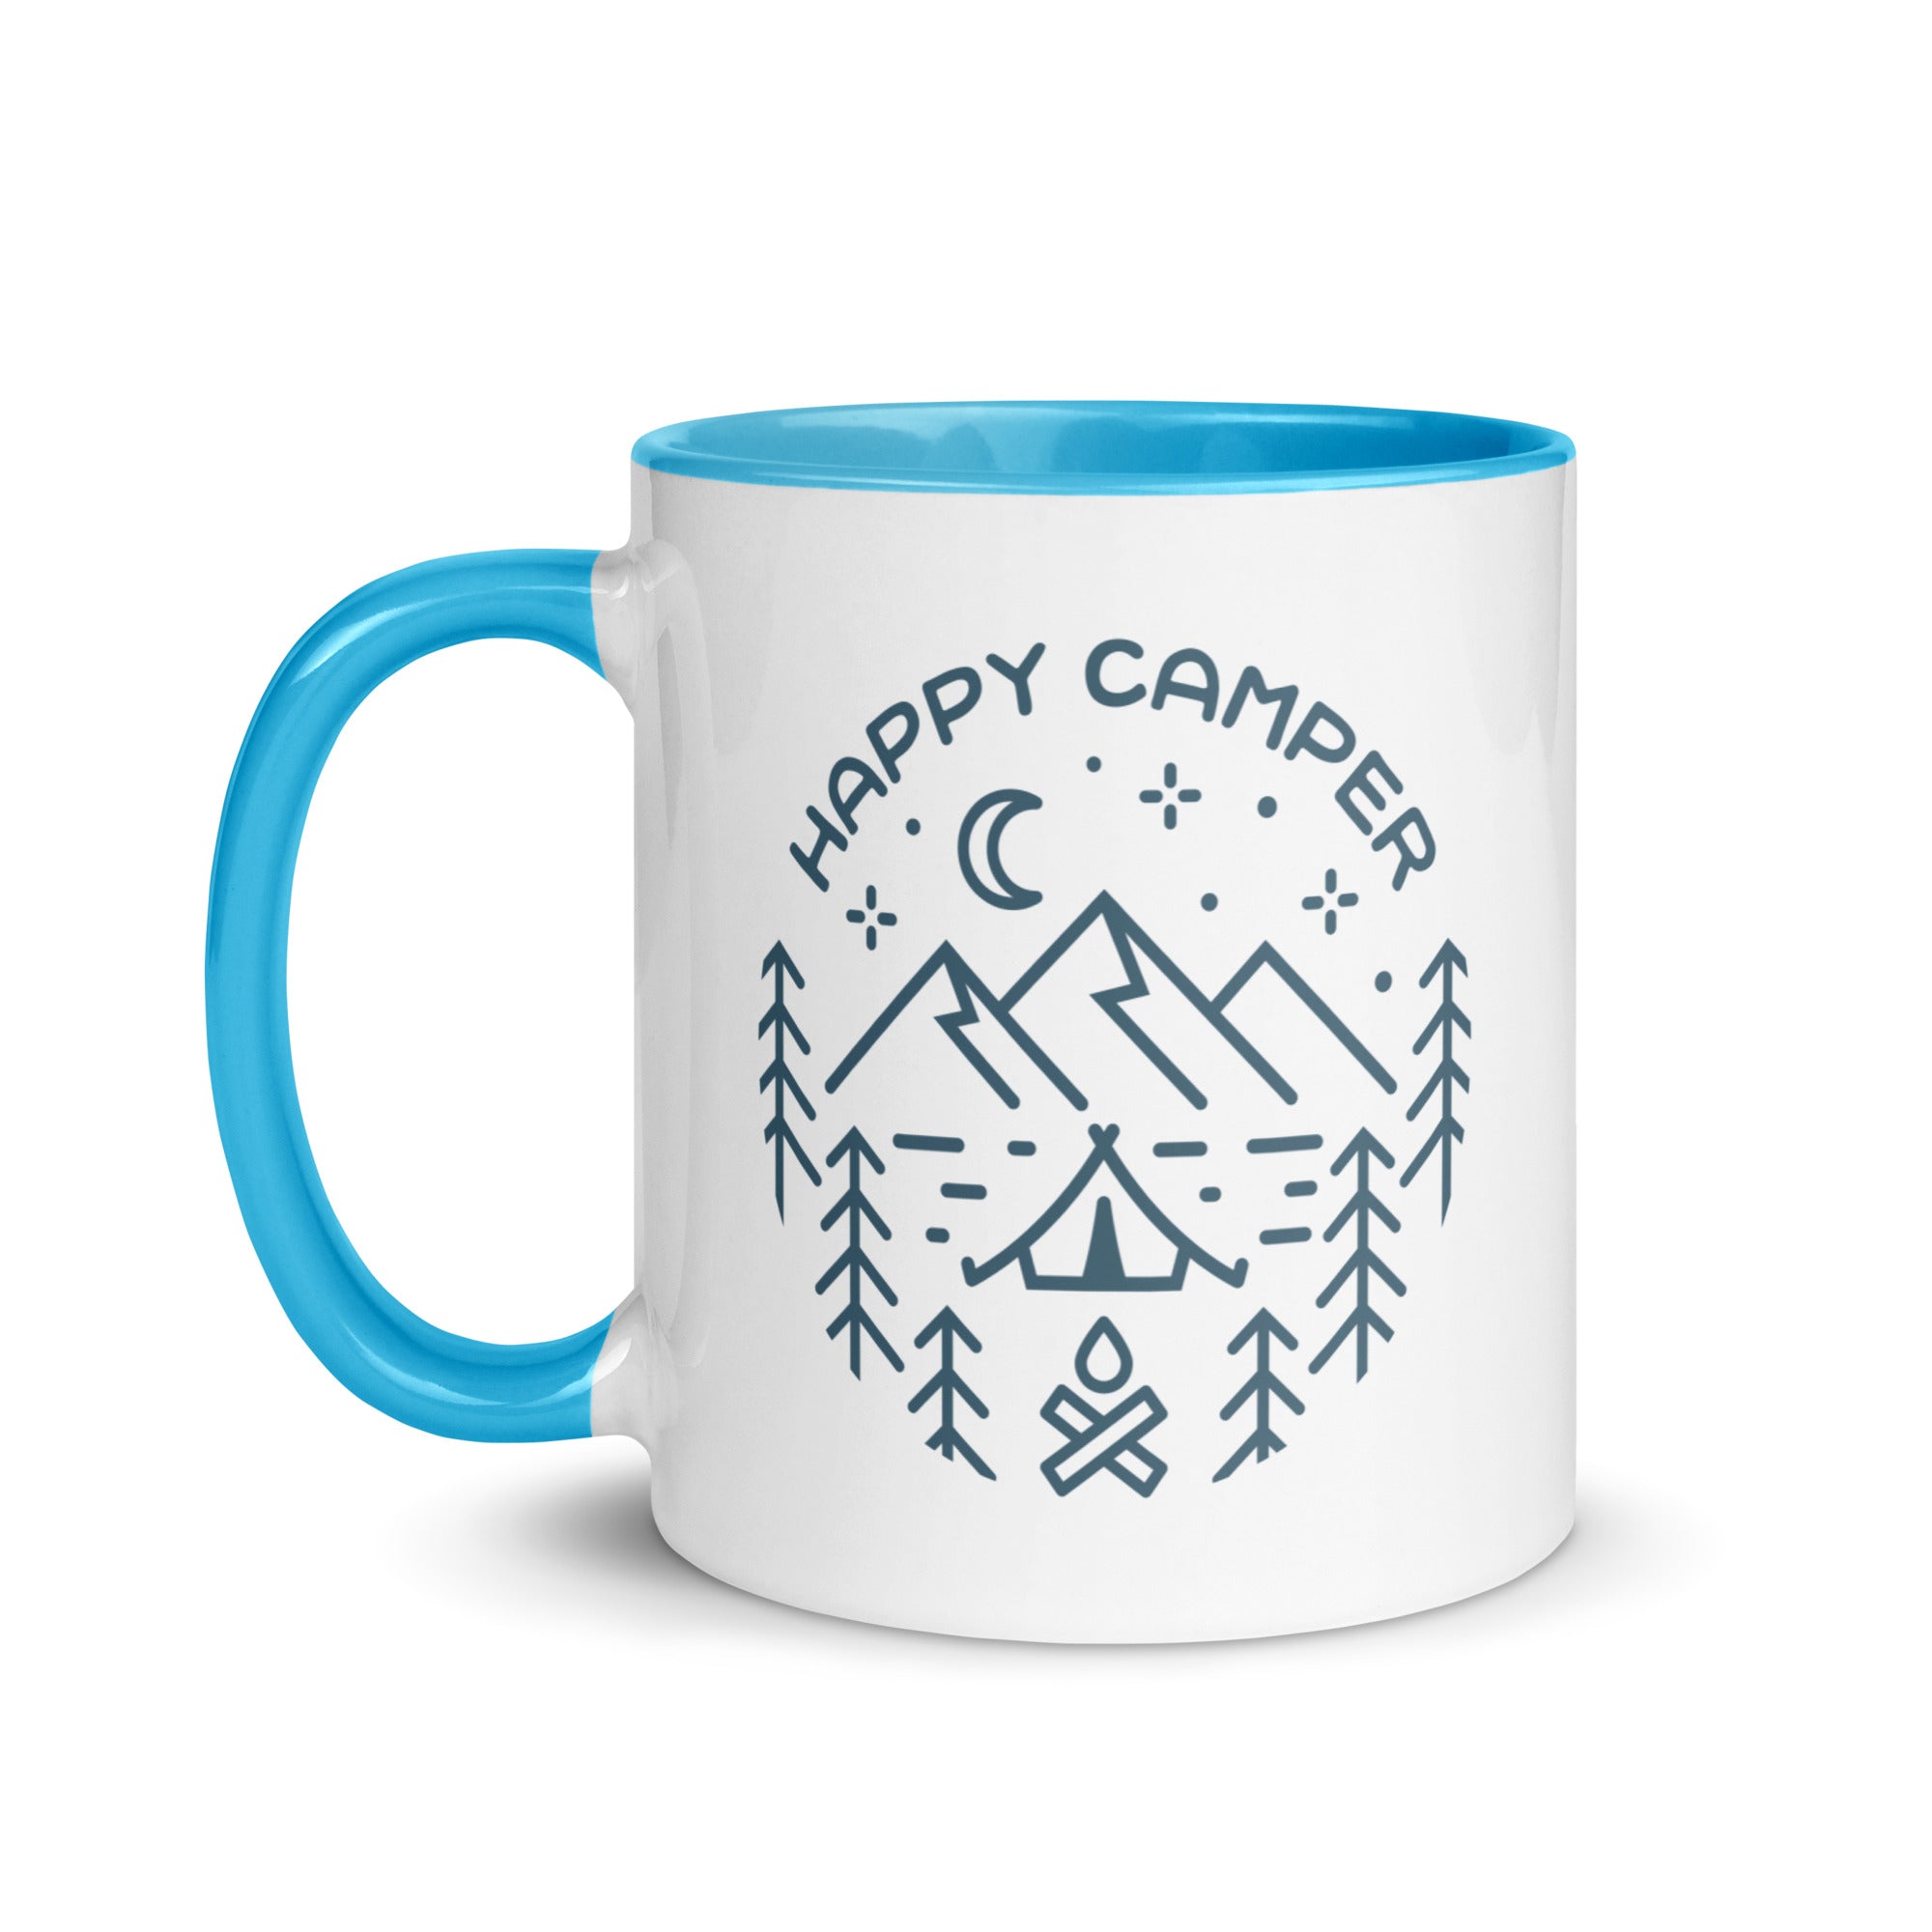 "Happy Camper" Ceramic Mug with Colorful Accents